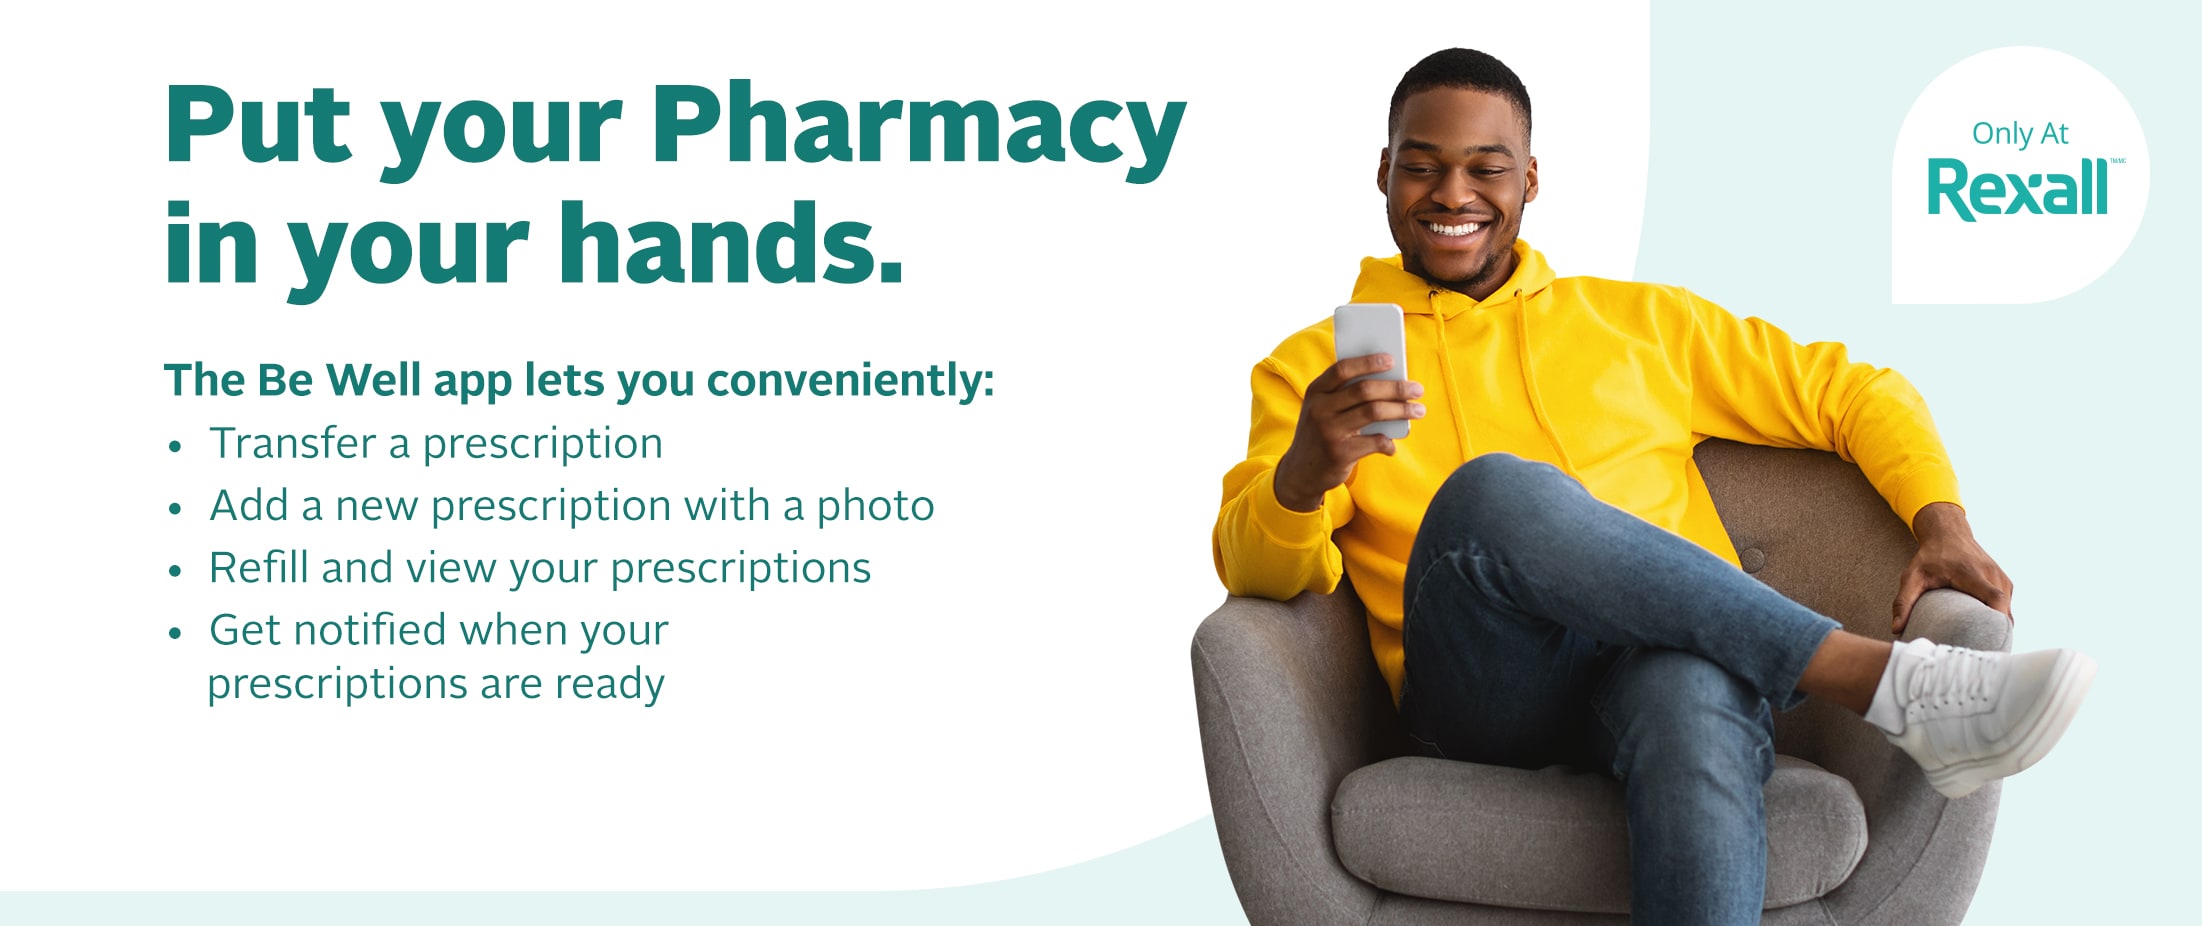 Put your Rexall Pharmacy in your hands - $10 incentive (male)